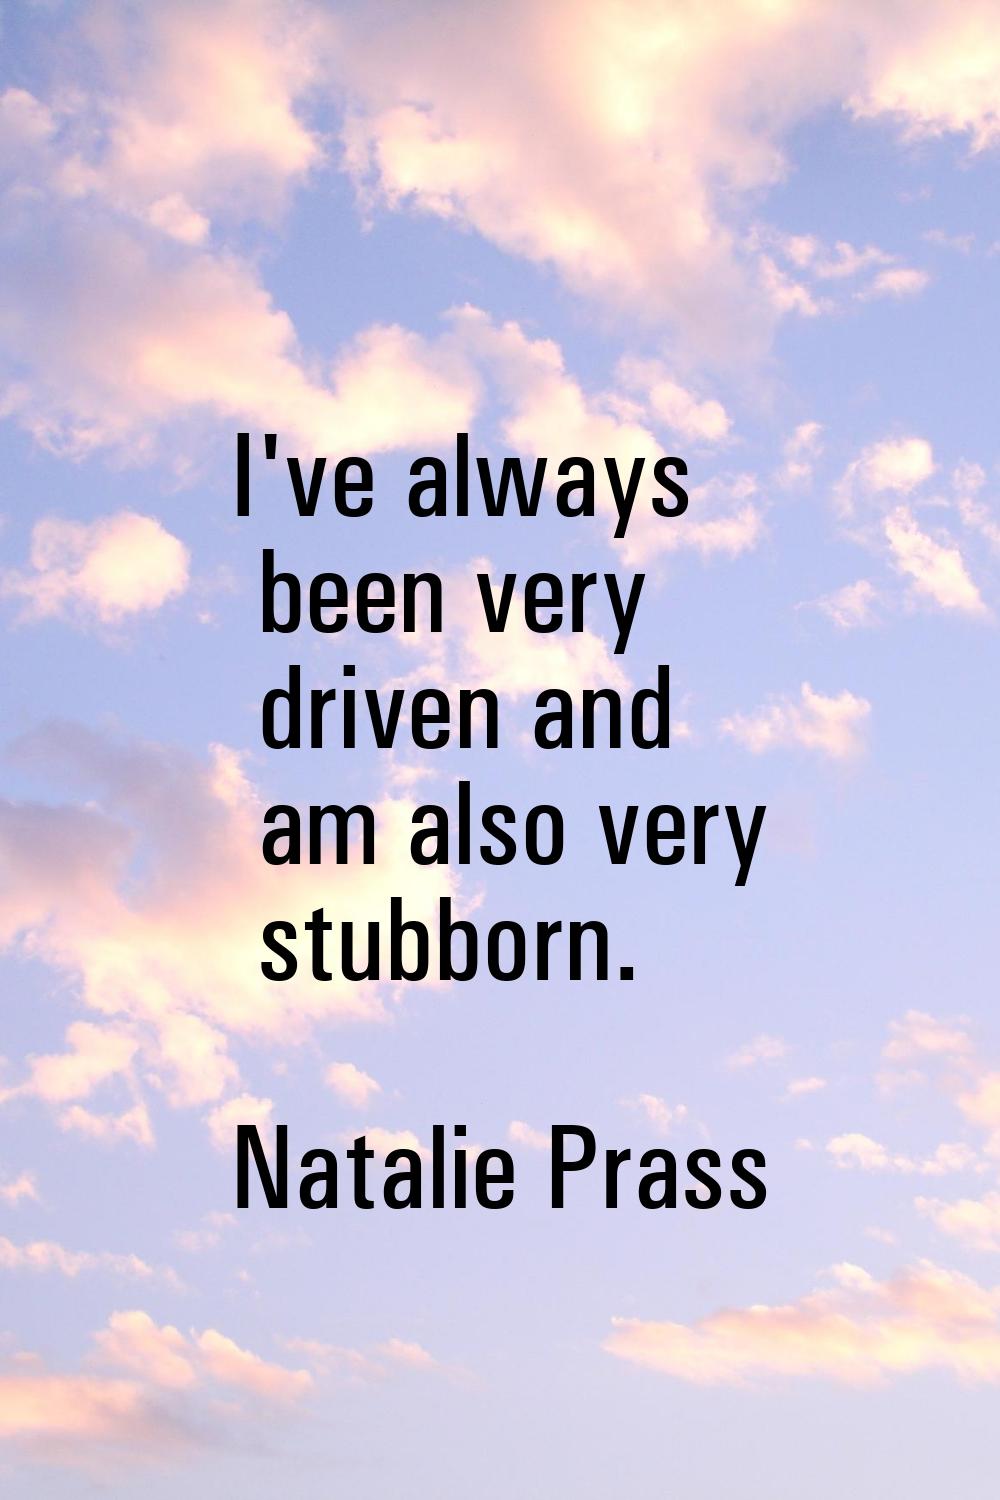 I've always been very driven and am also very stubborn.